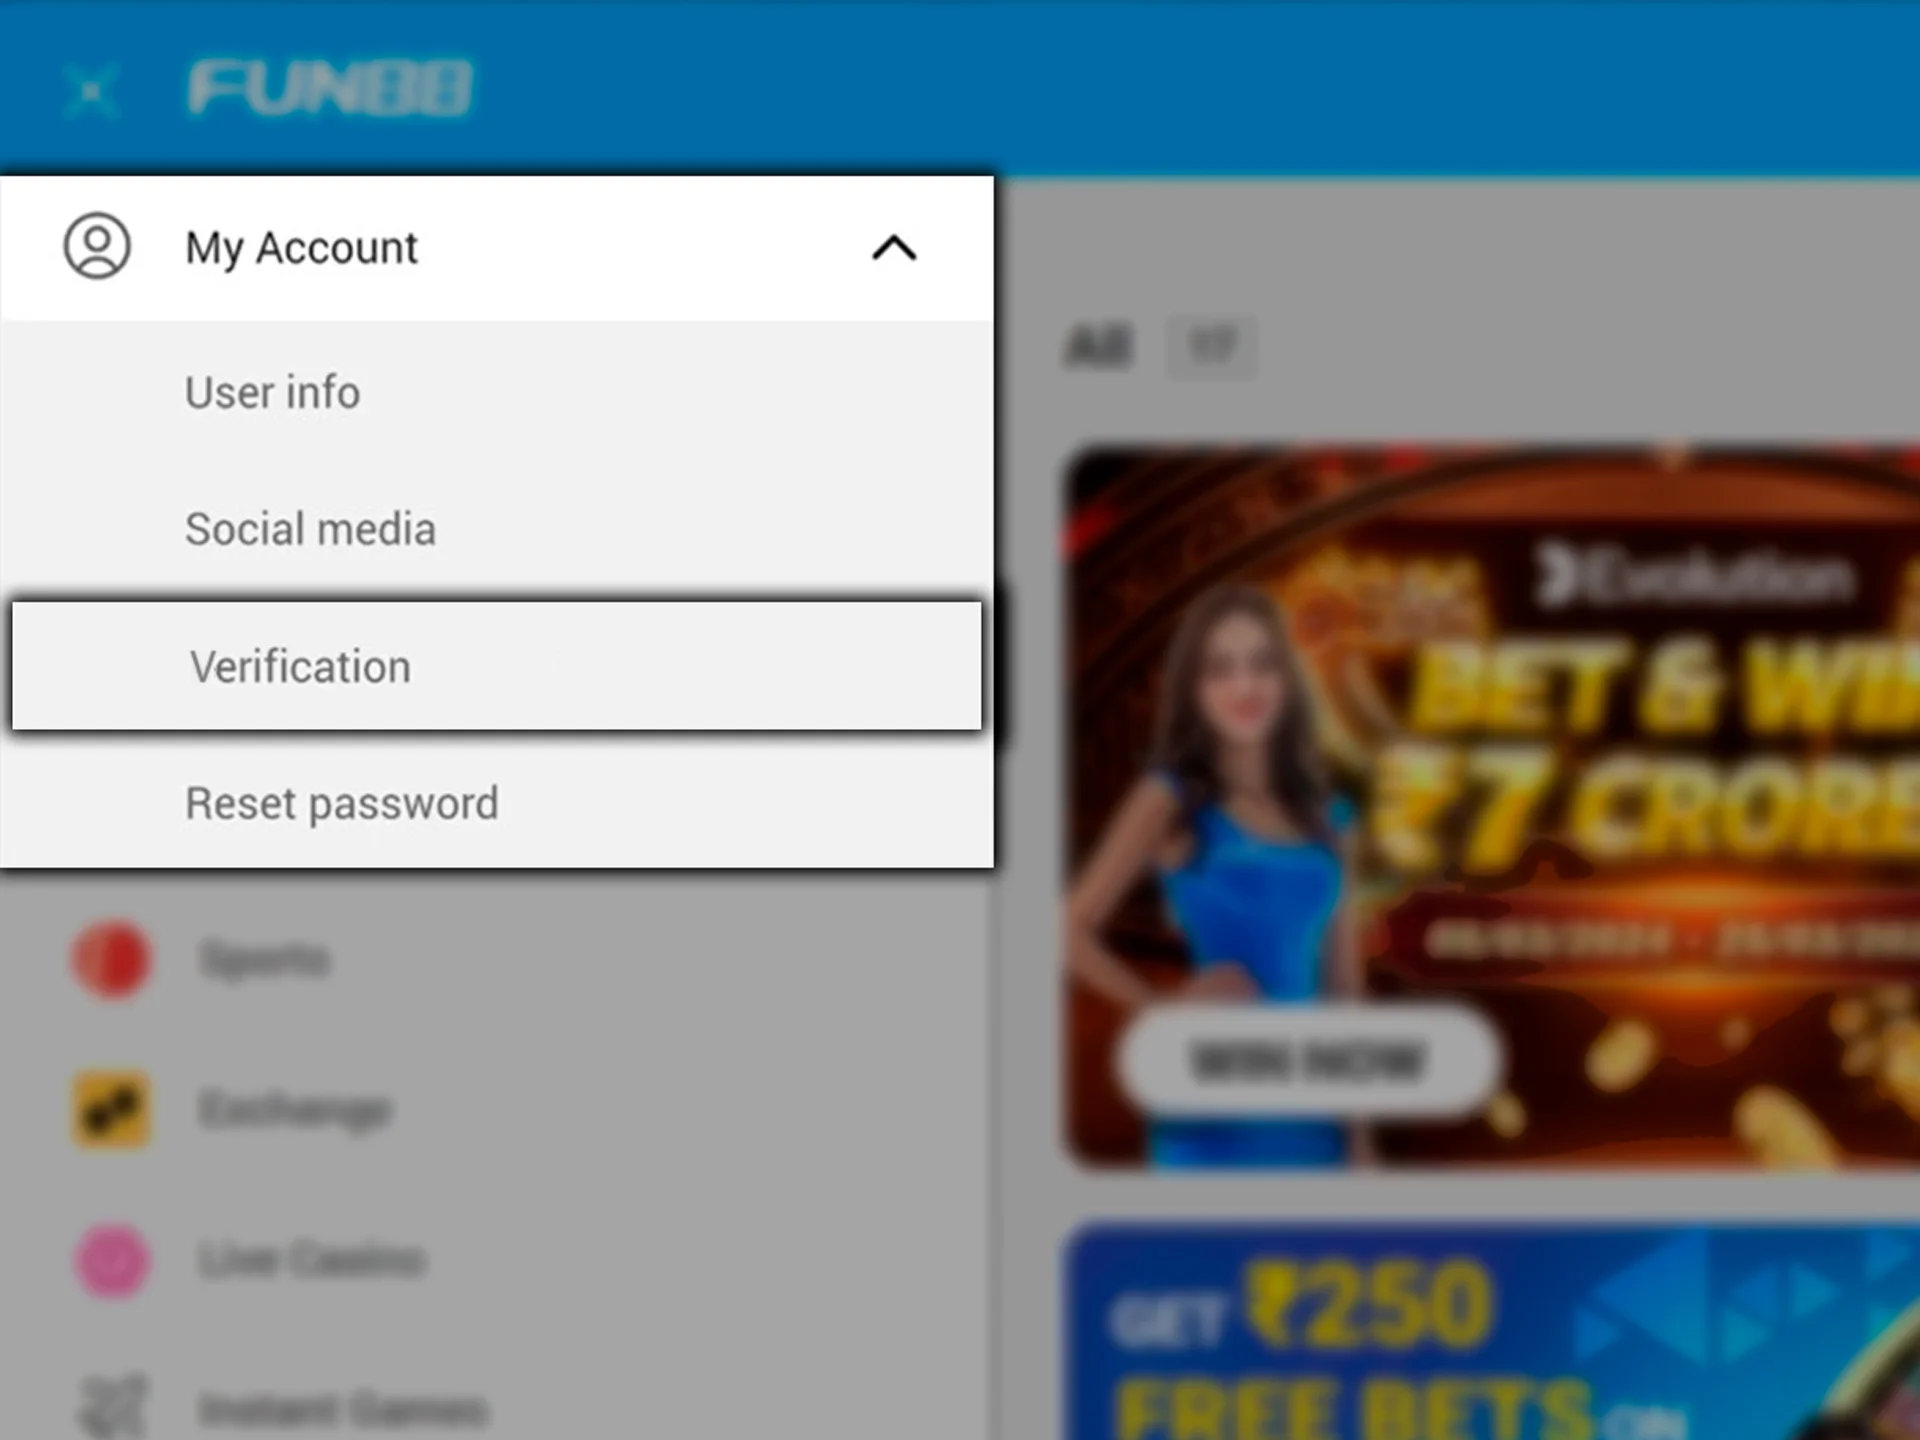 Go to your Fun88 profile settings and verify your account by providing the appropriate document.